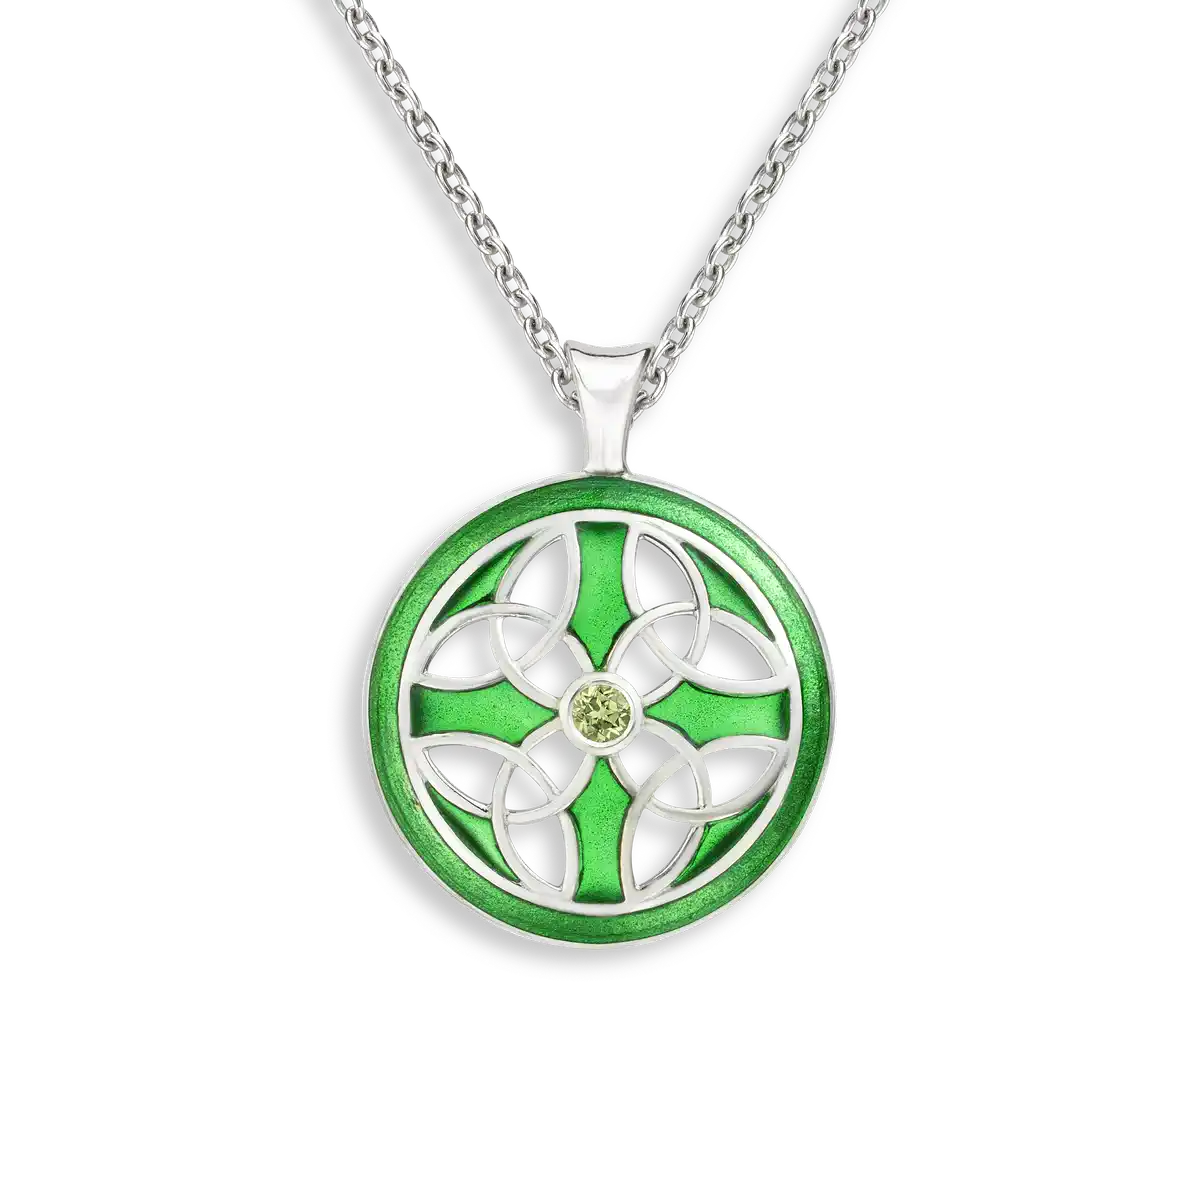 sterling silver jewellery york Unisex Sterling Silver Oxidised Celtic Cross  Pendant Wiith Triquetra Design (14mm x 23mm) (N298) Sterling silver  jewellery range of Fashion and costume and body jewellery.